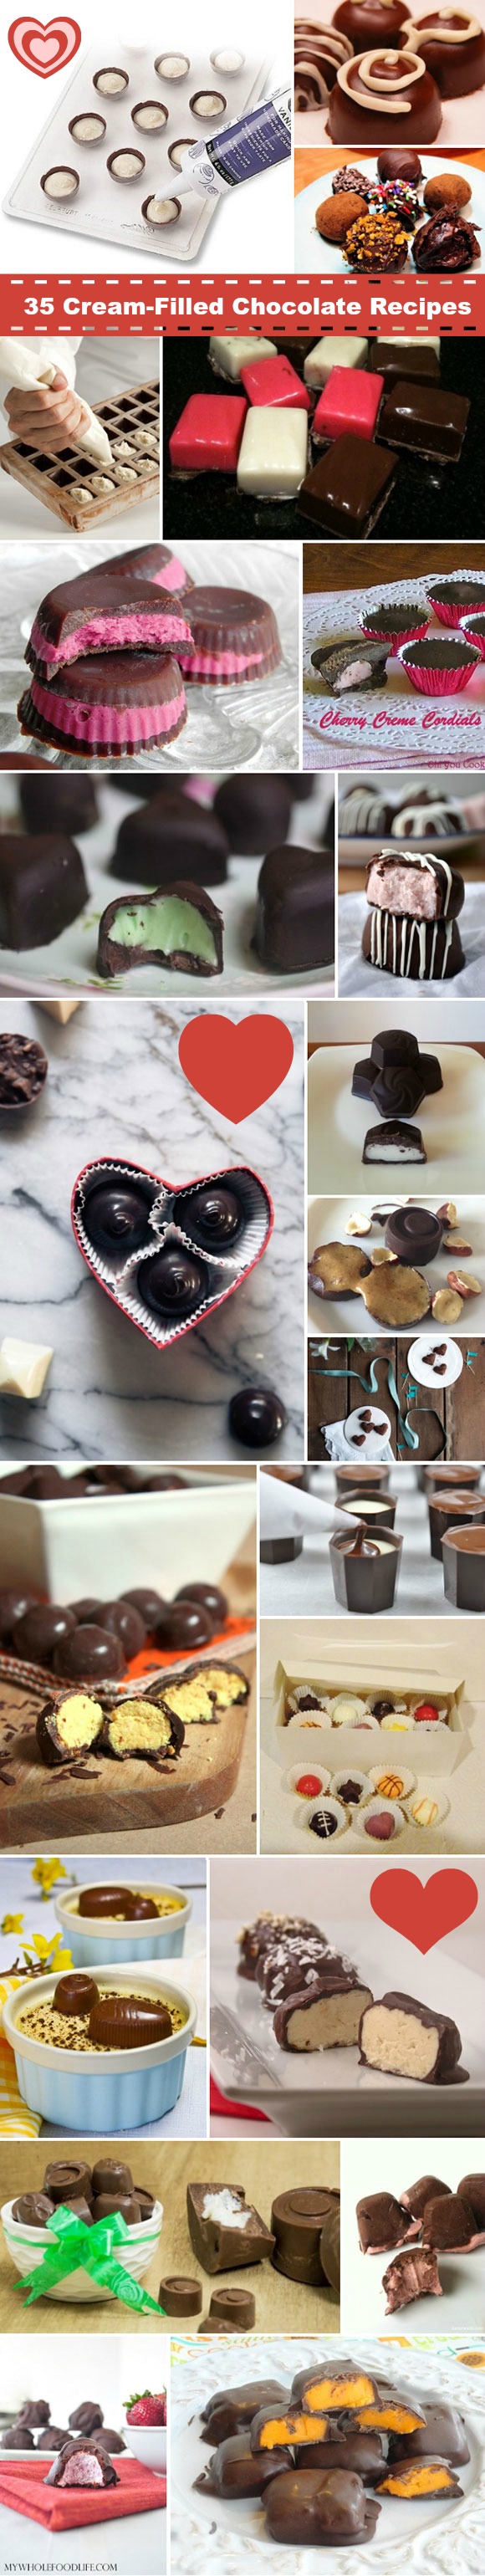 February 14th is National Cream-Filled Chocolates Day – Best 35 Recipes